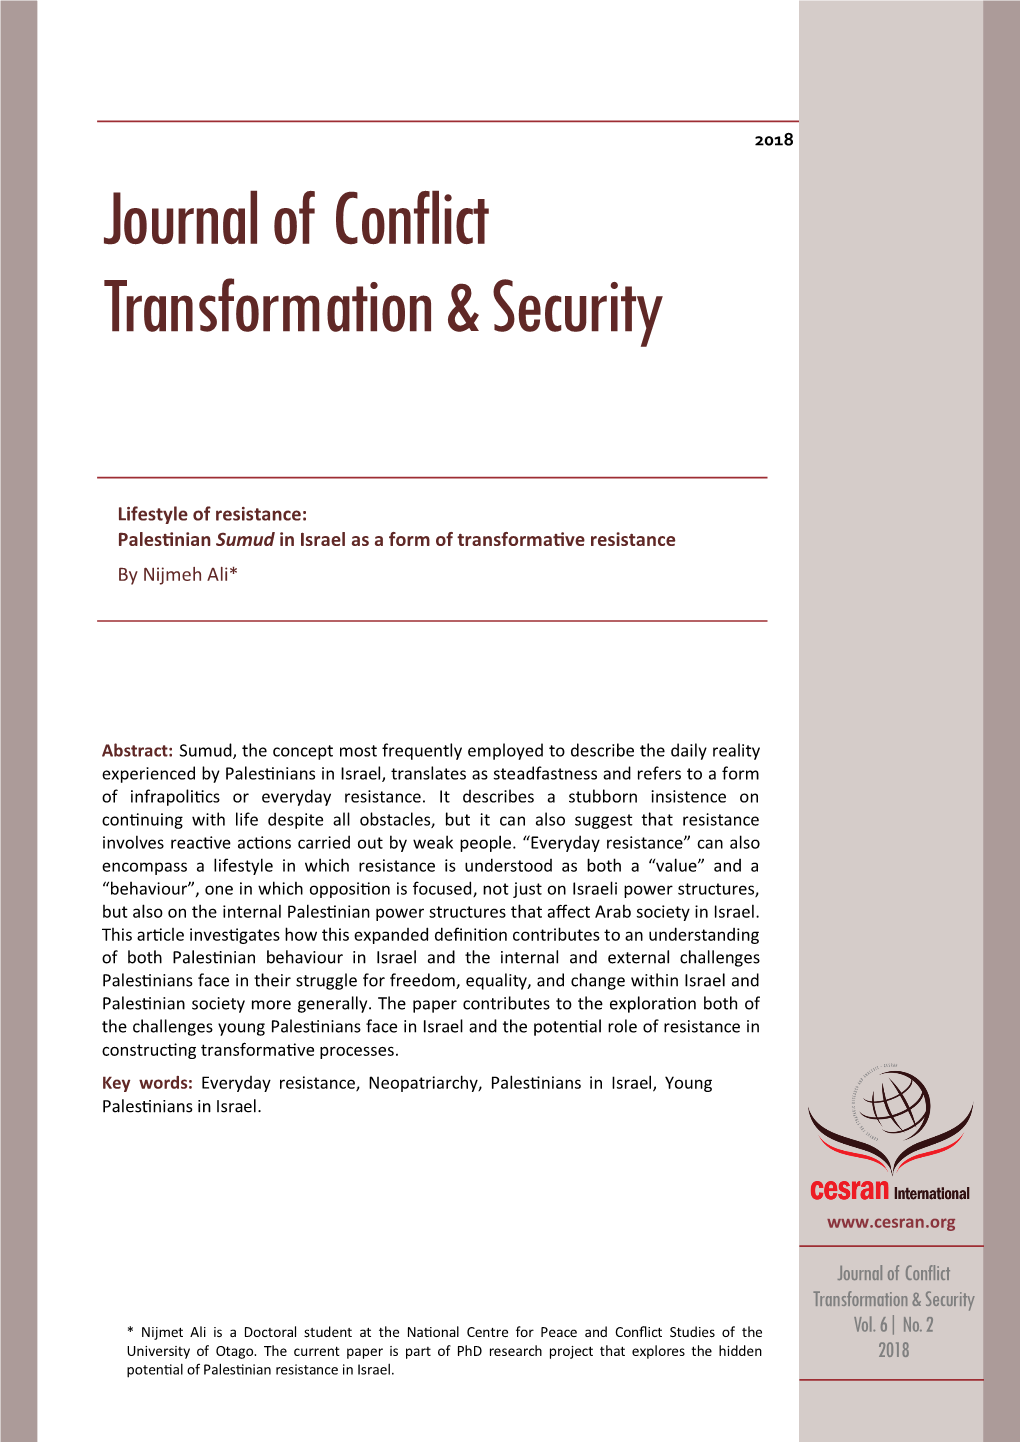 Journal of Conflict Transformation & Security